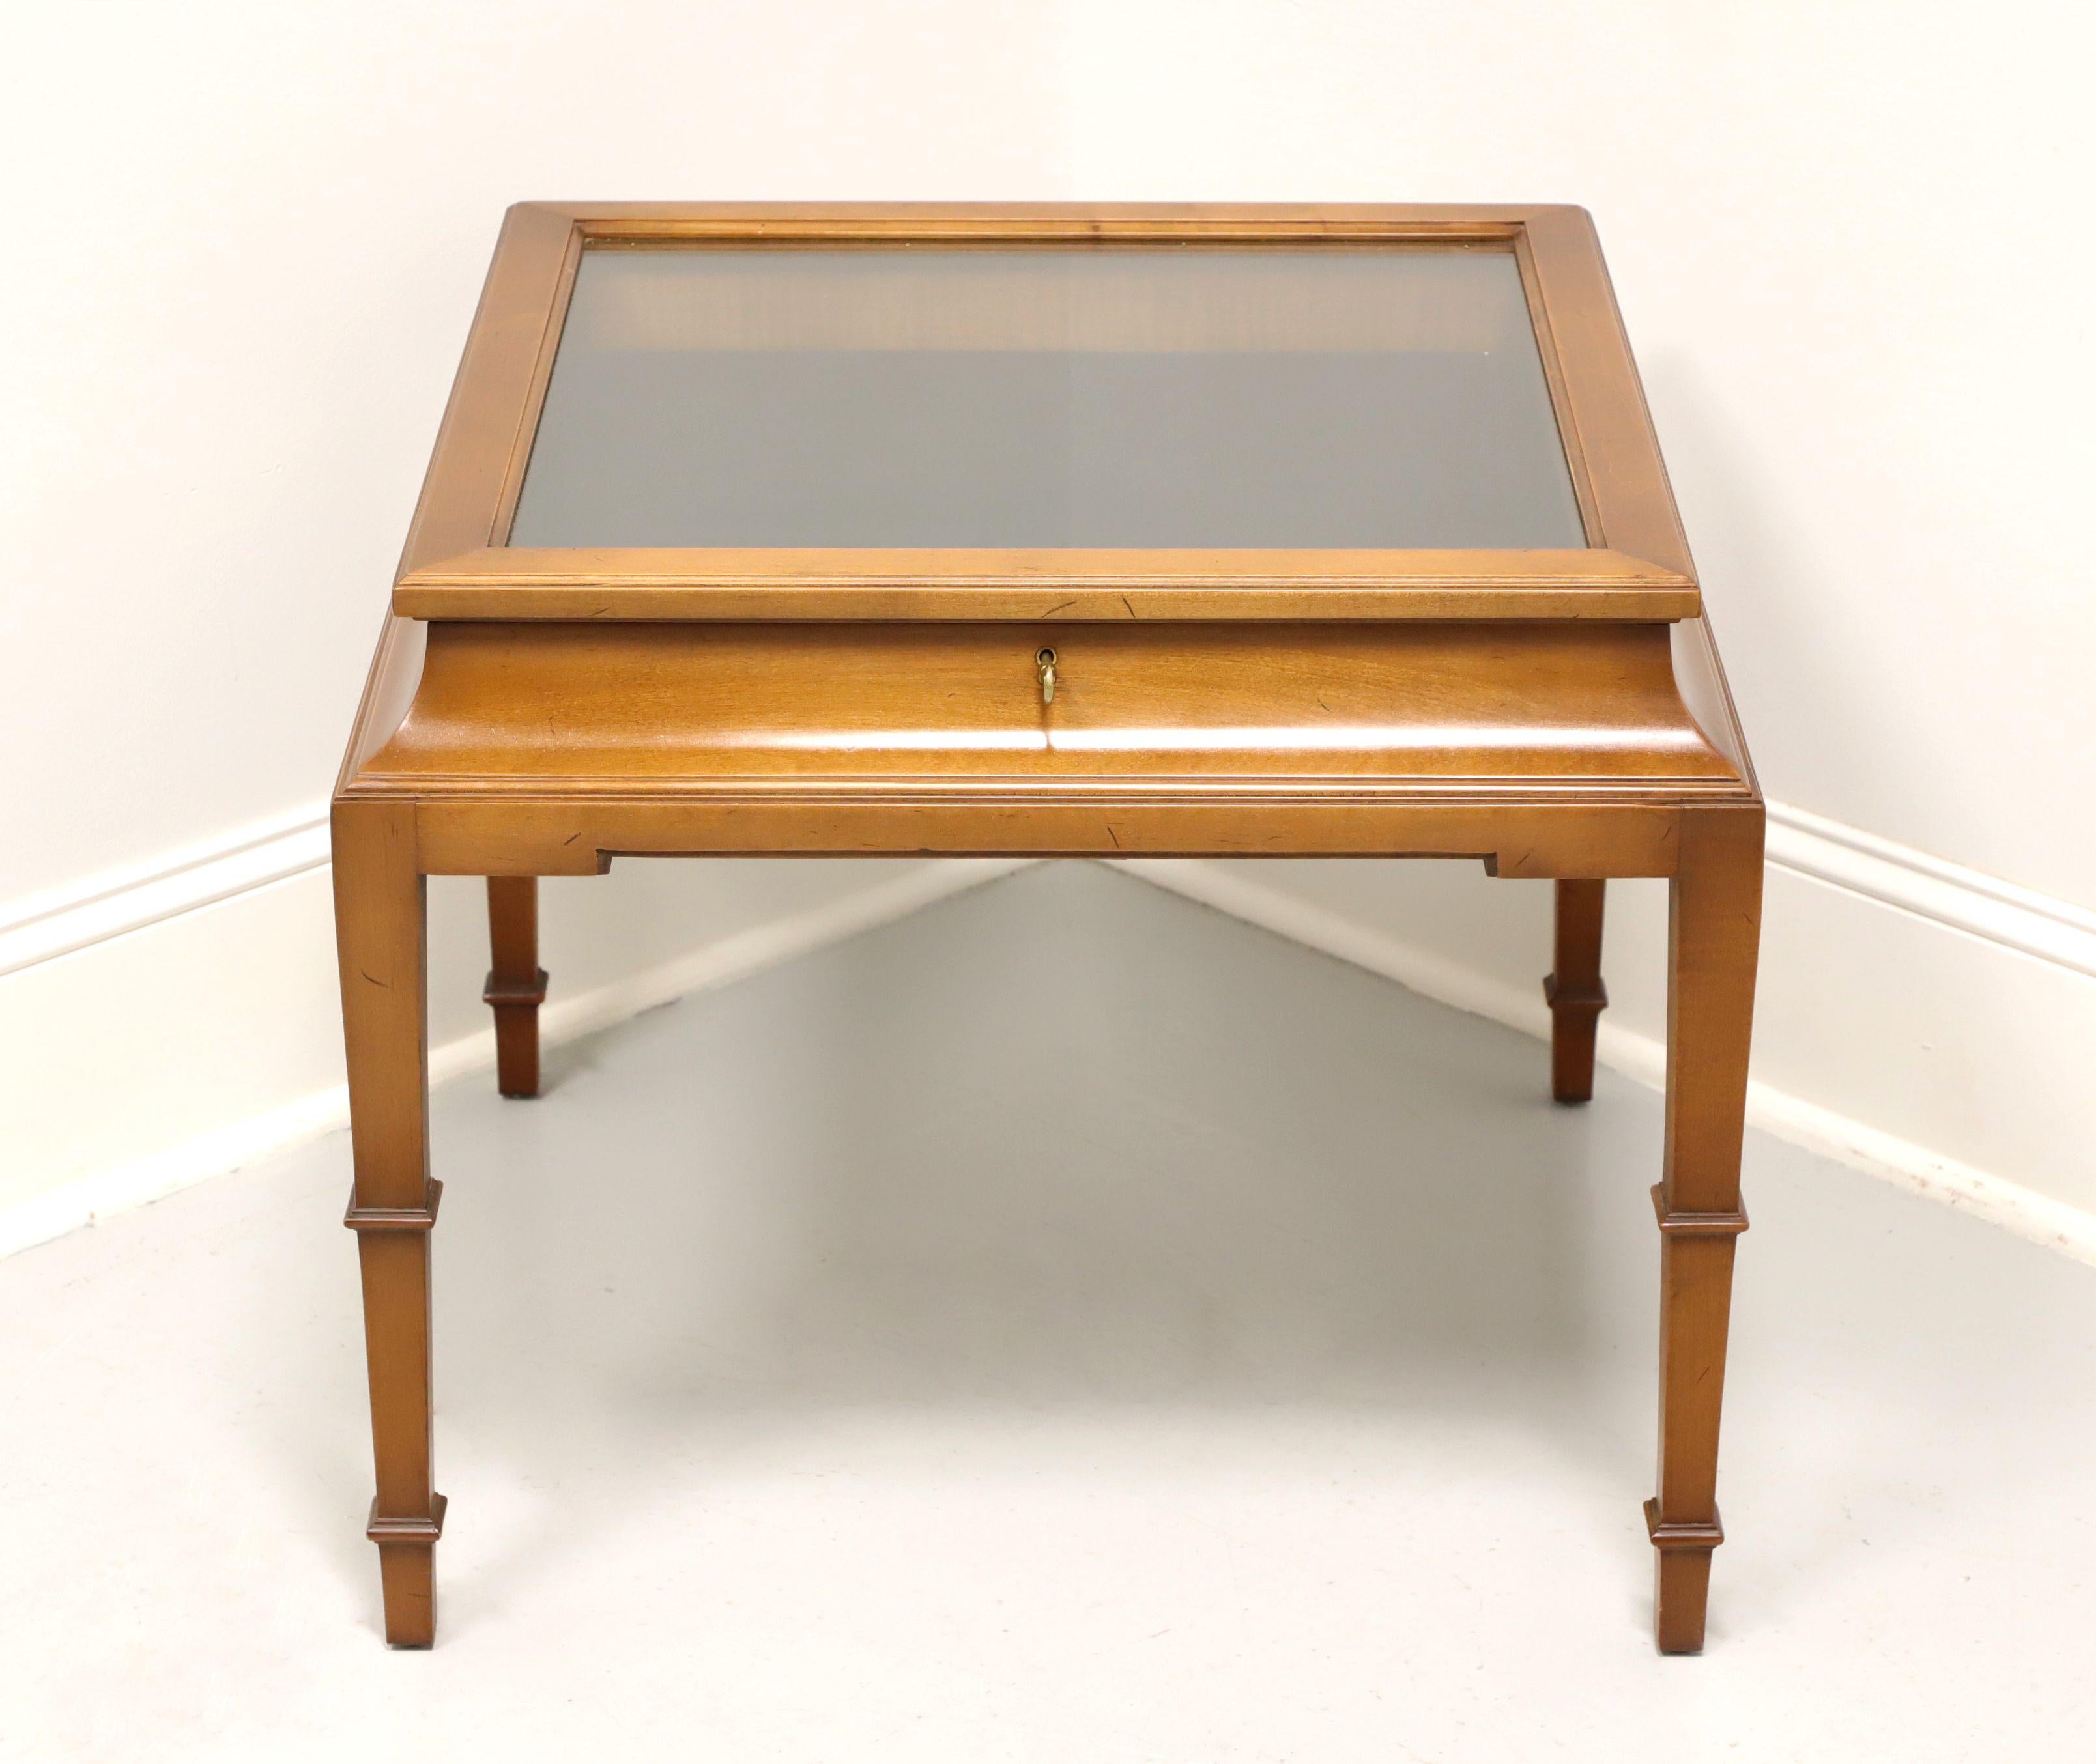 A French Louis XVI style square glass top accent table with display case by Tomlinson. Nutwood with a slightly distressed finish, framed glass top, black felt lined interior, tapered legs and spade feet. Features a lockable framed glass lift top